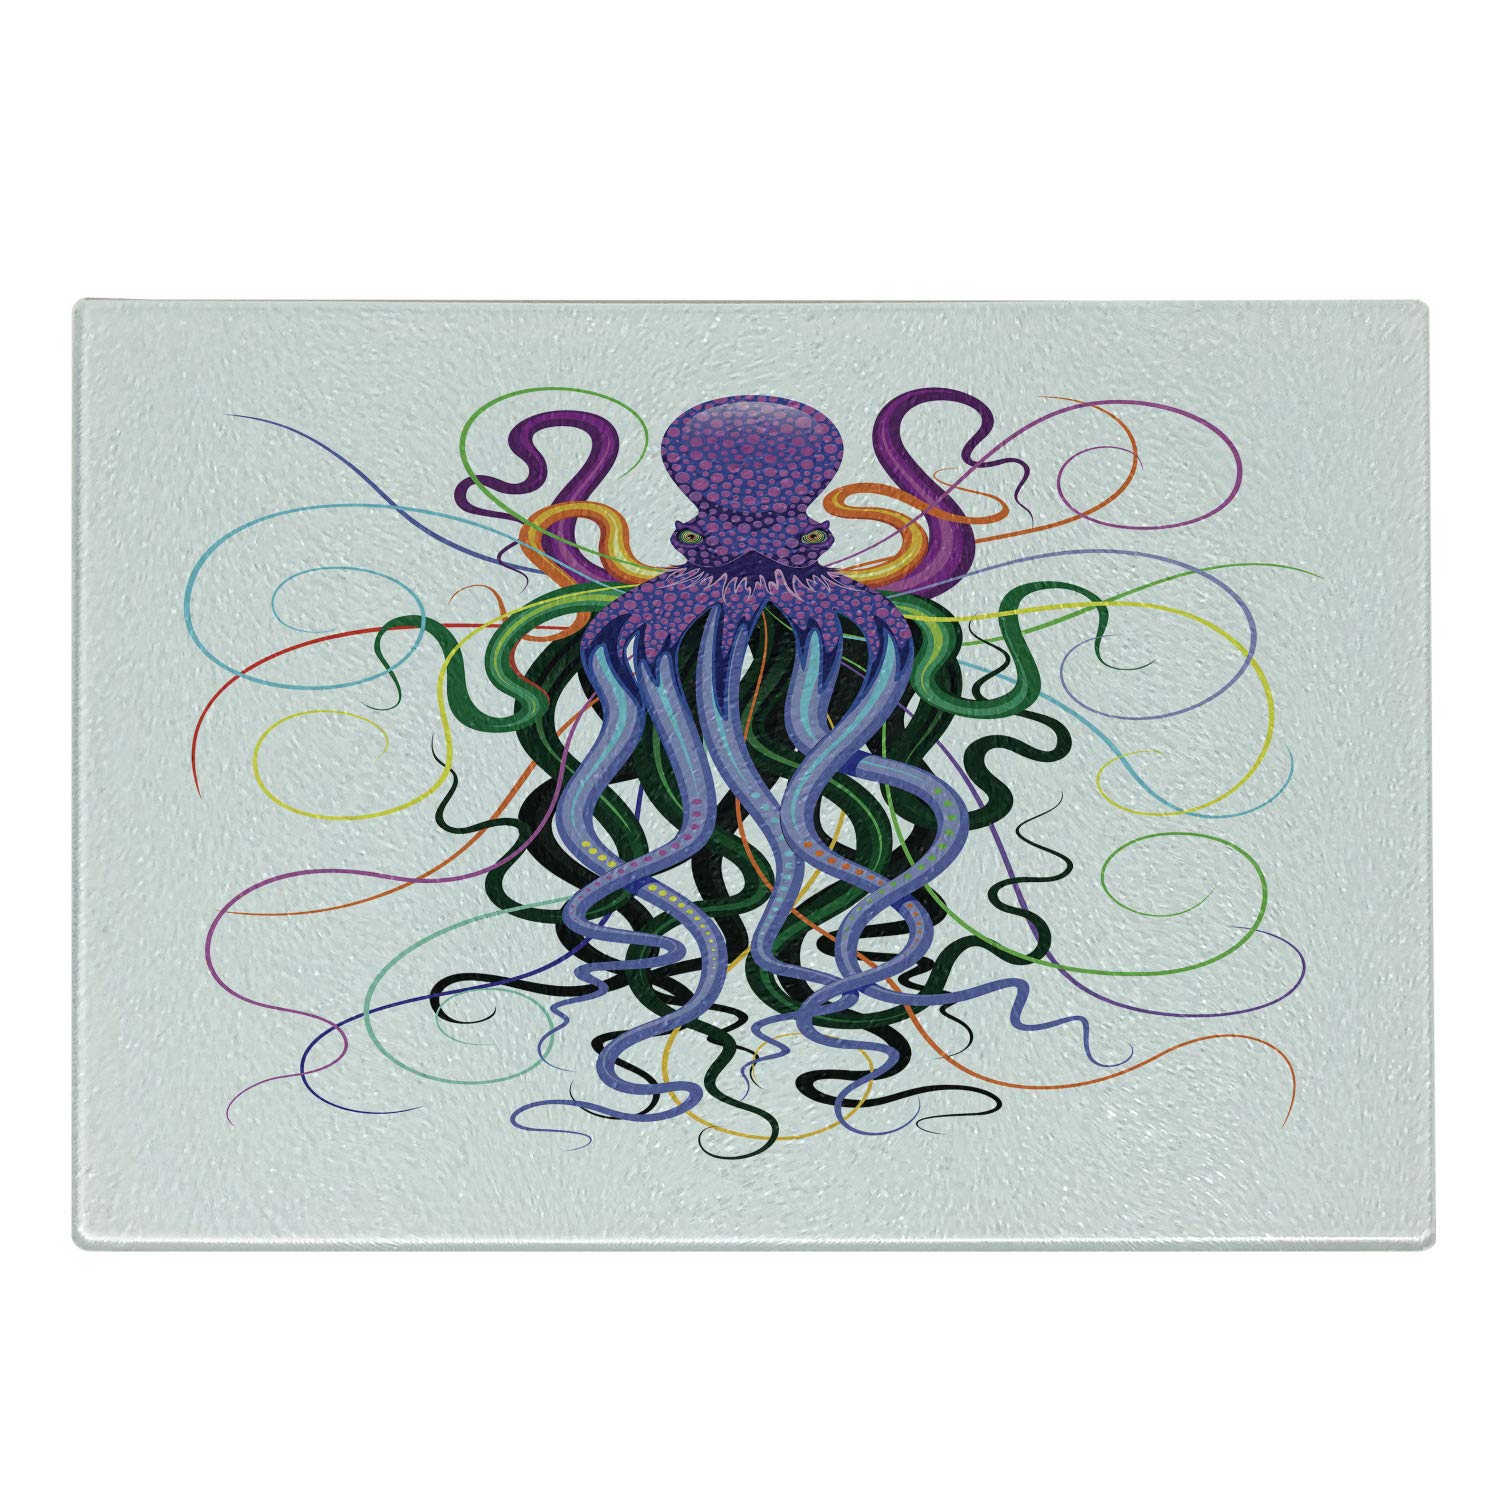 Lunarable Octopus Cutting Board, Chaotic Nautical Underwater Creatures Aquatic Animal Tentacles Rainbow Pigments, Decorative Tempered Glass Cutting and Serving Board, Small Size, Multicolor